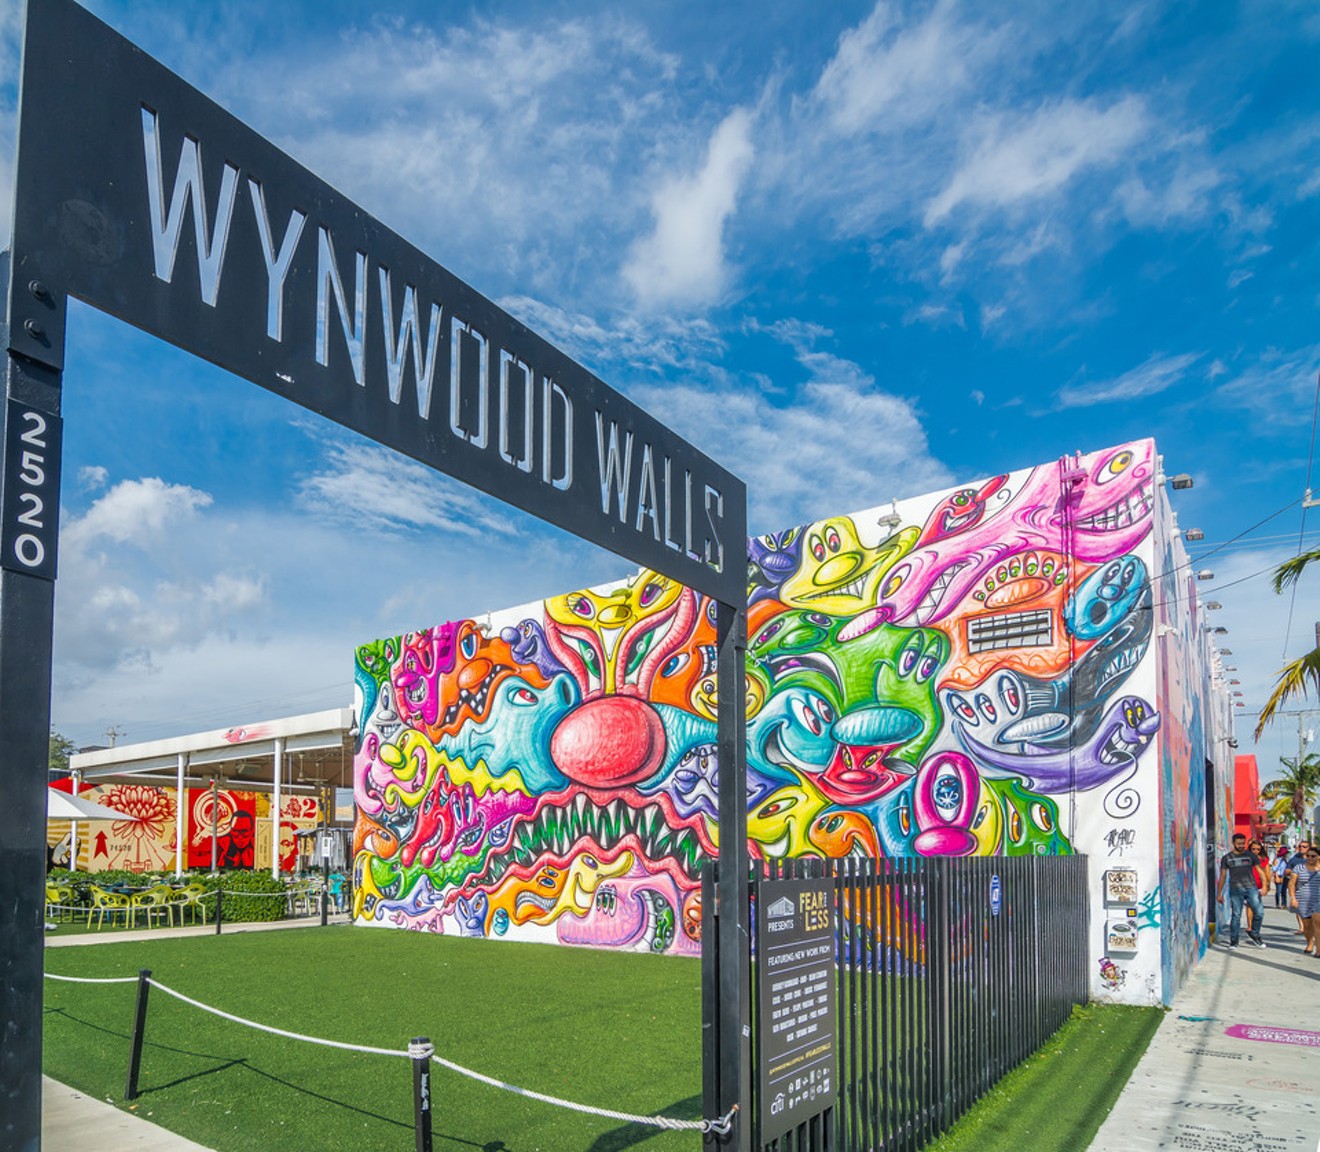 The entrance to the Wynwood Walls